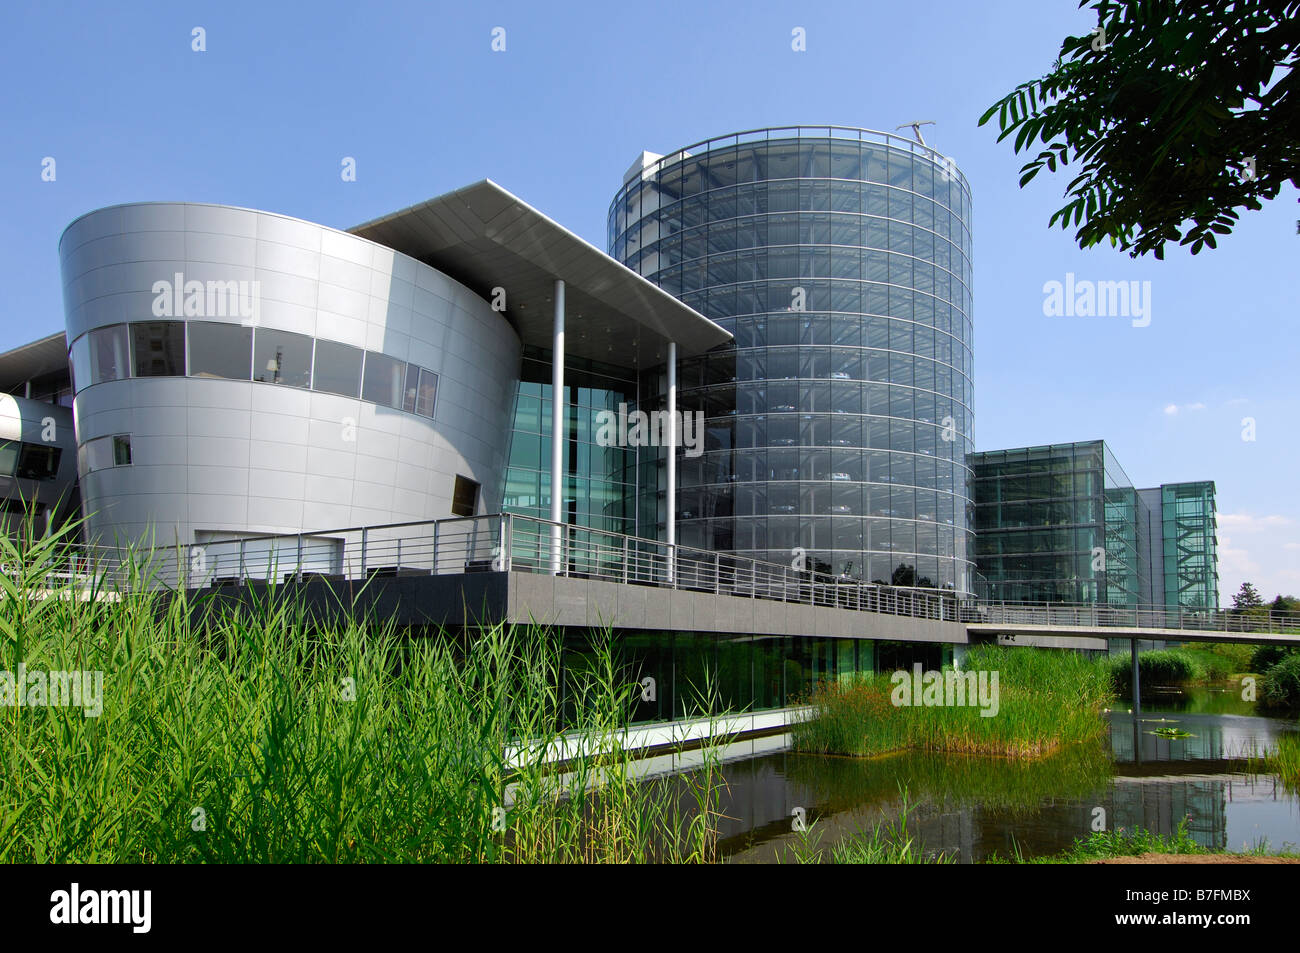 The Transparent Plant by the VW group, Volkswagen Glaeserne Manufaktur, Dresden, Saxony, Germany Stock Photo